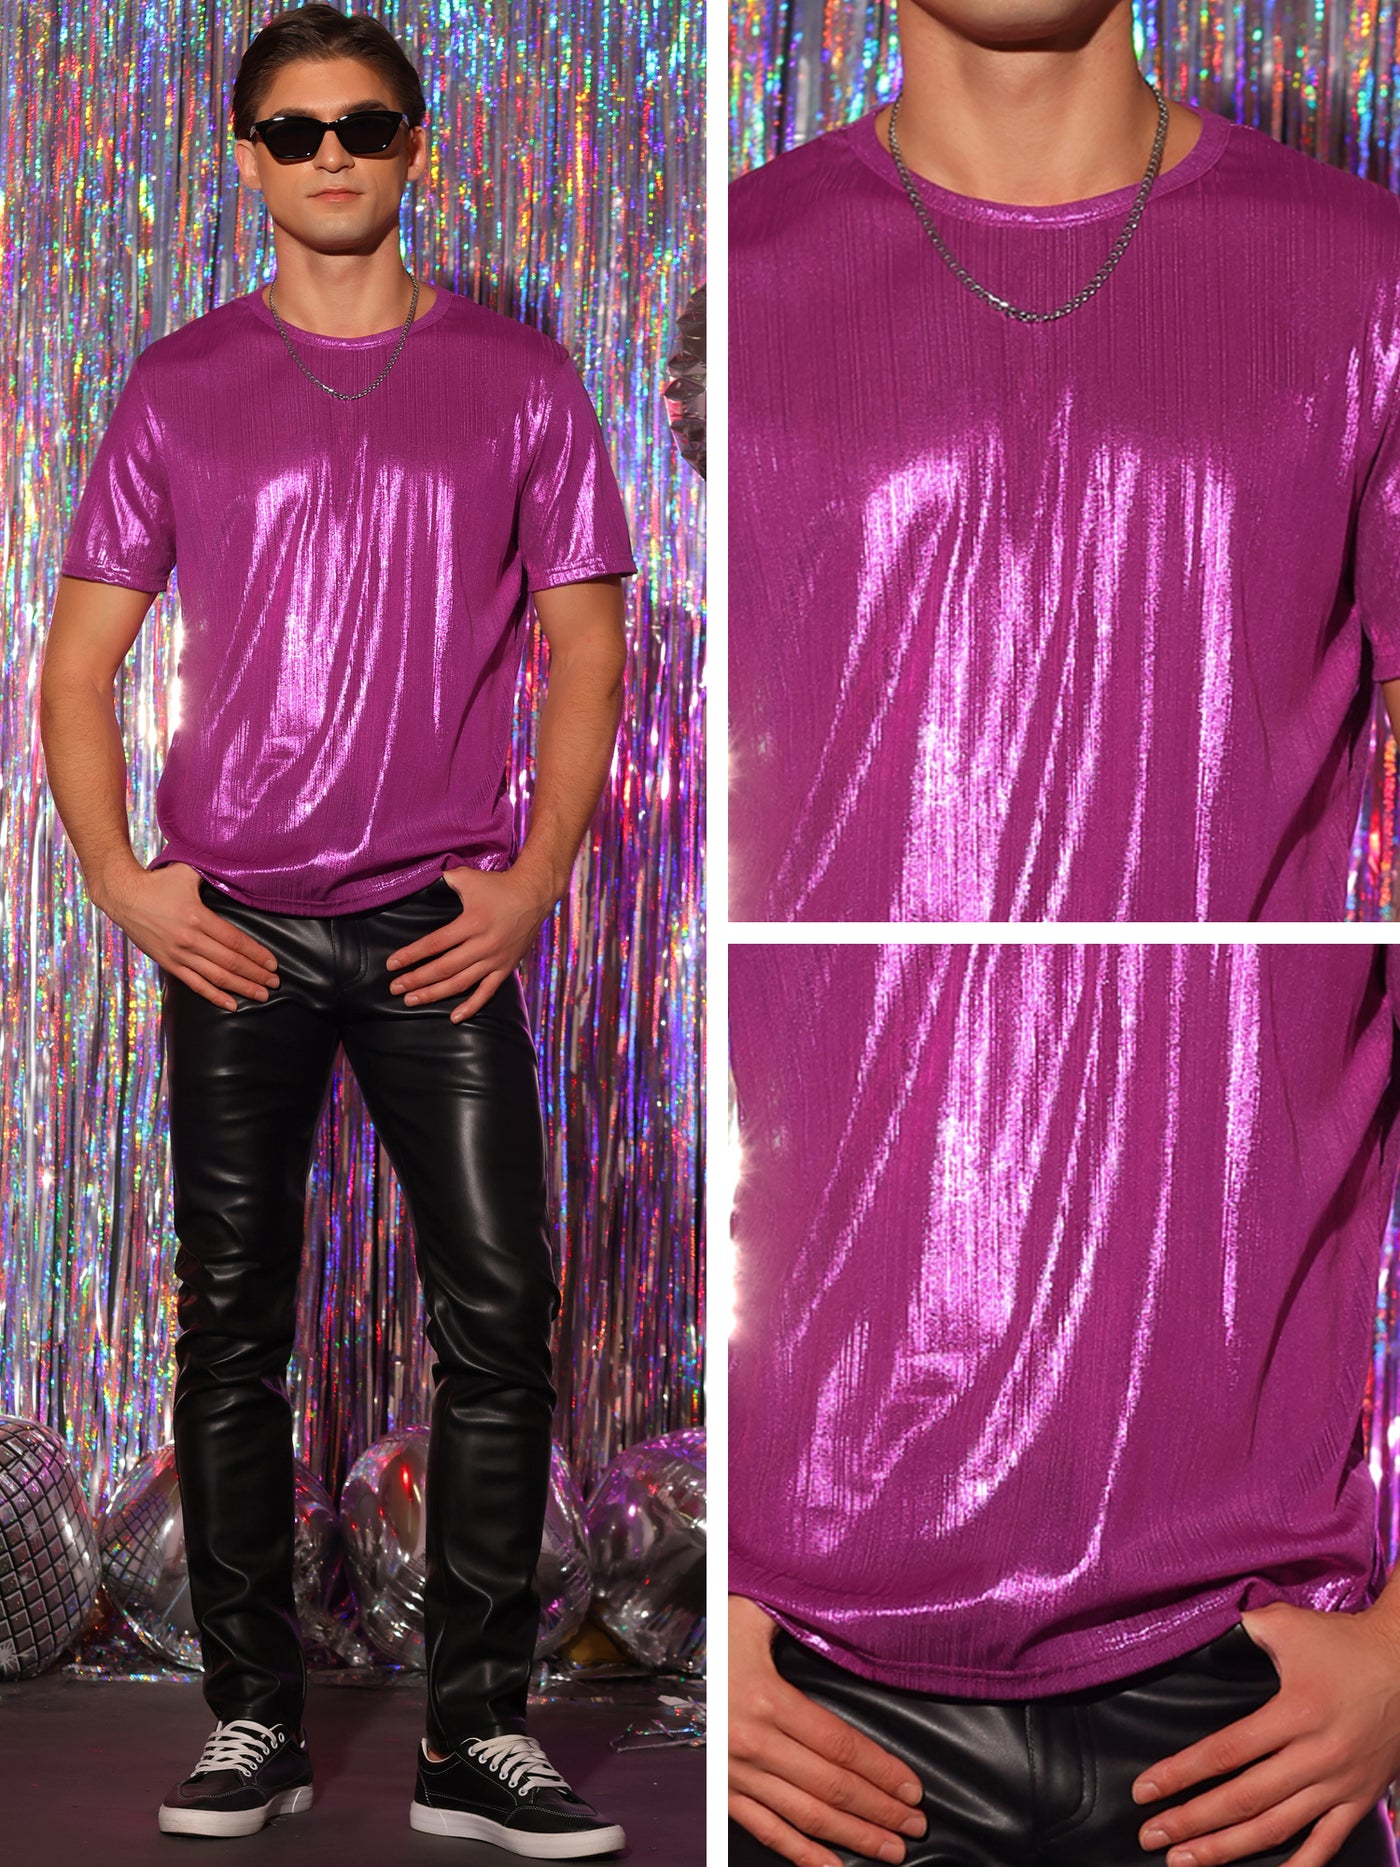 Bublédon Metallic Sparkly Shirts for Men's Crew Neck Short Sleeves Tops Party T-Shirts